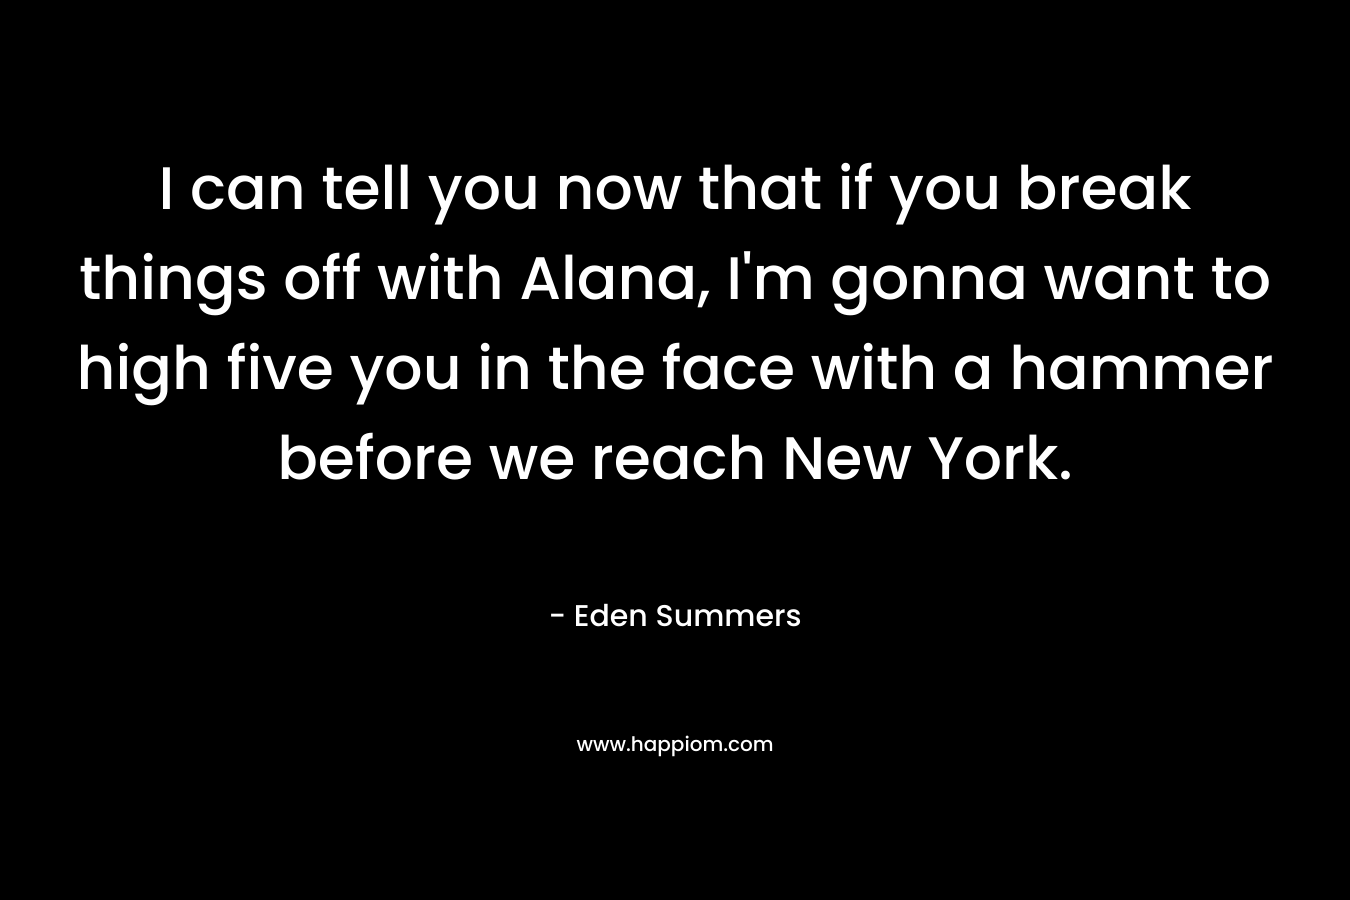 I can tell you now that if you break things off with Alana, I’m gonna want to high five you in the face with a hammer before we reach New York. – Eden Summers